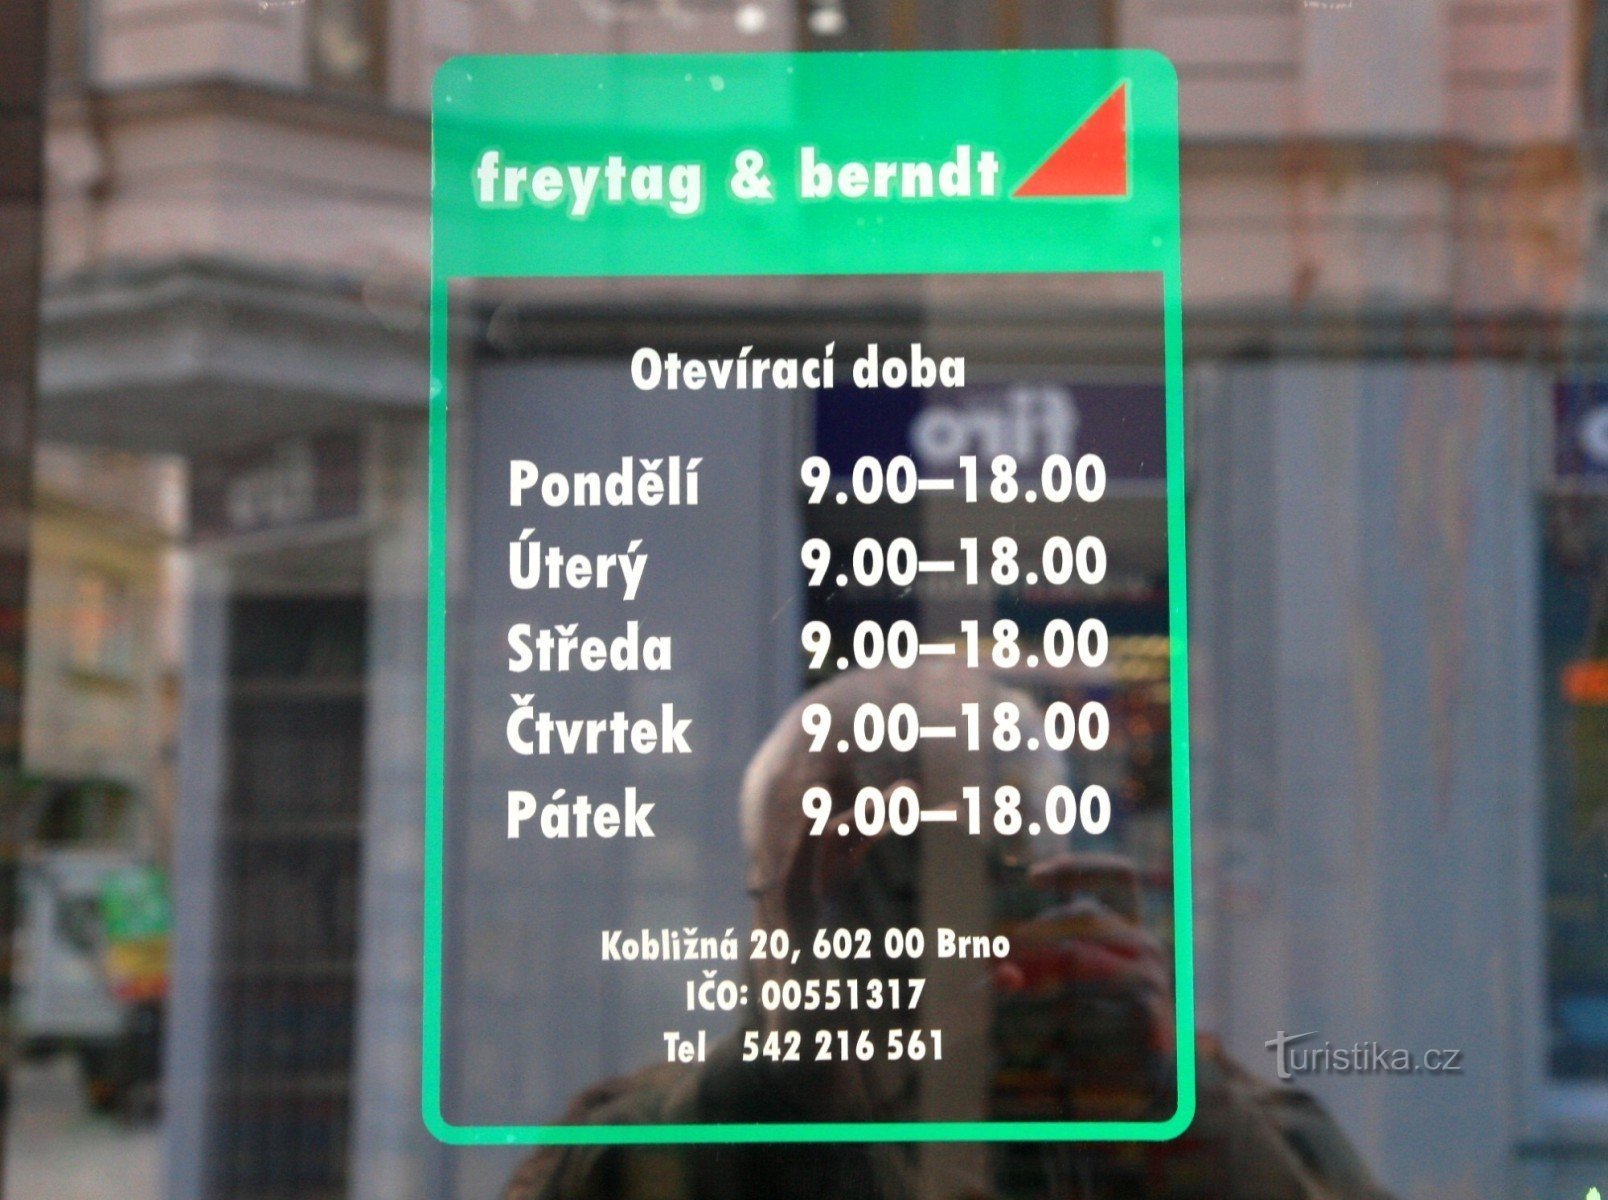 Contact and opening hours of the shop